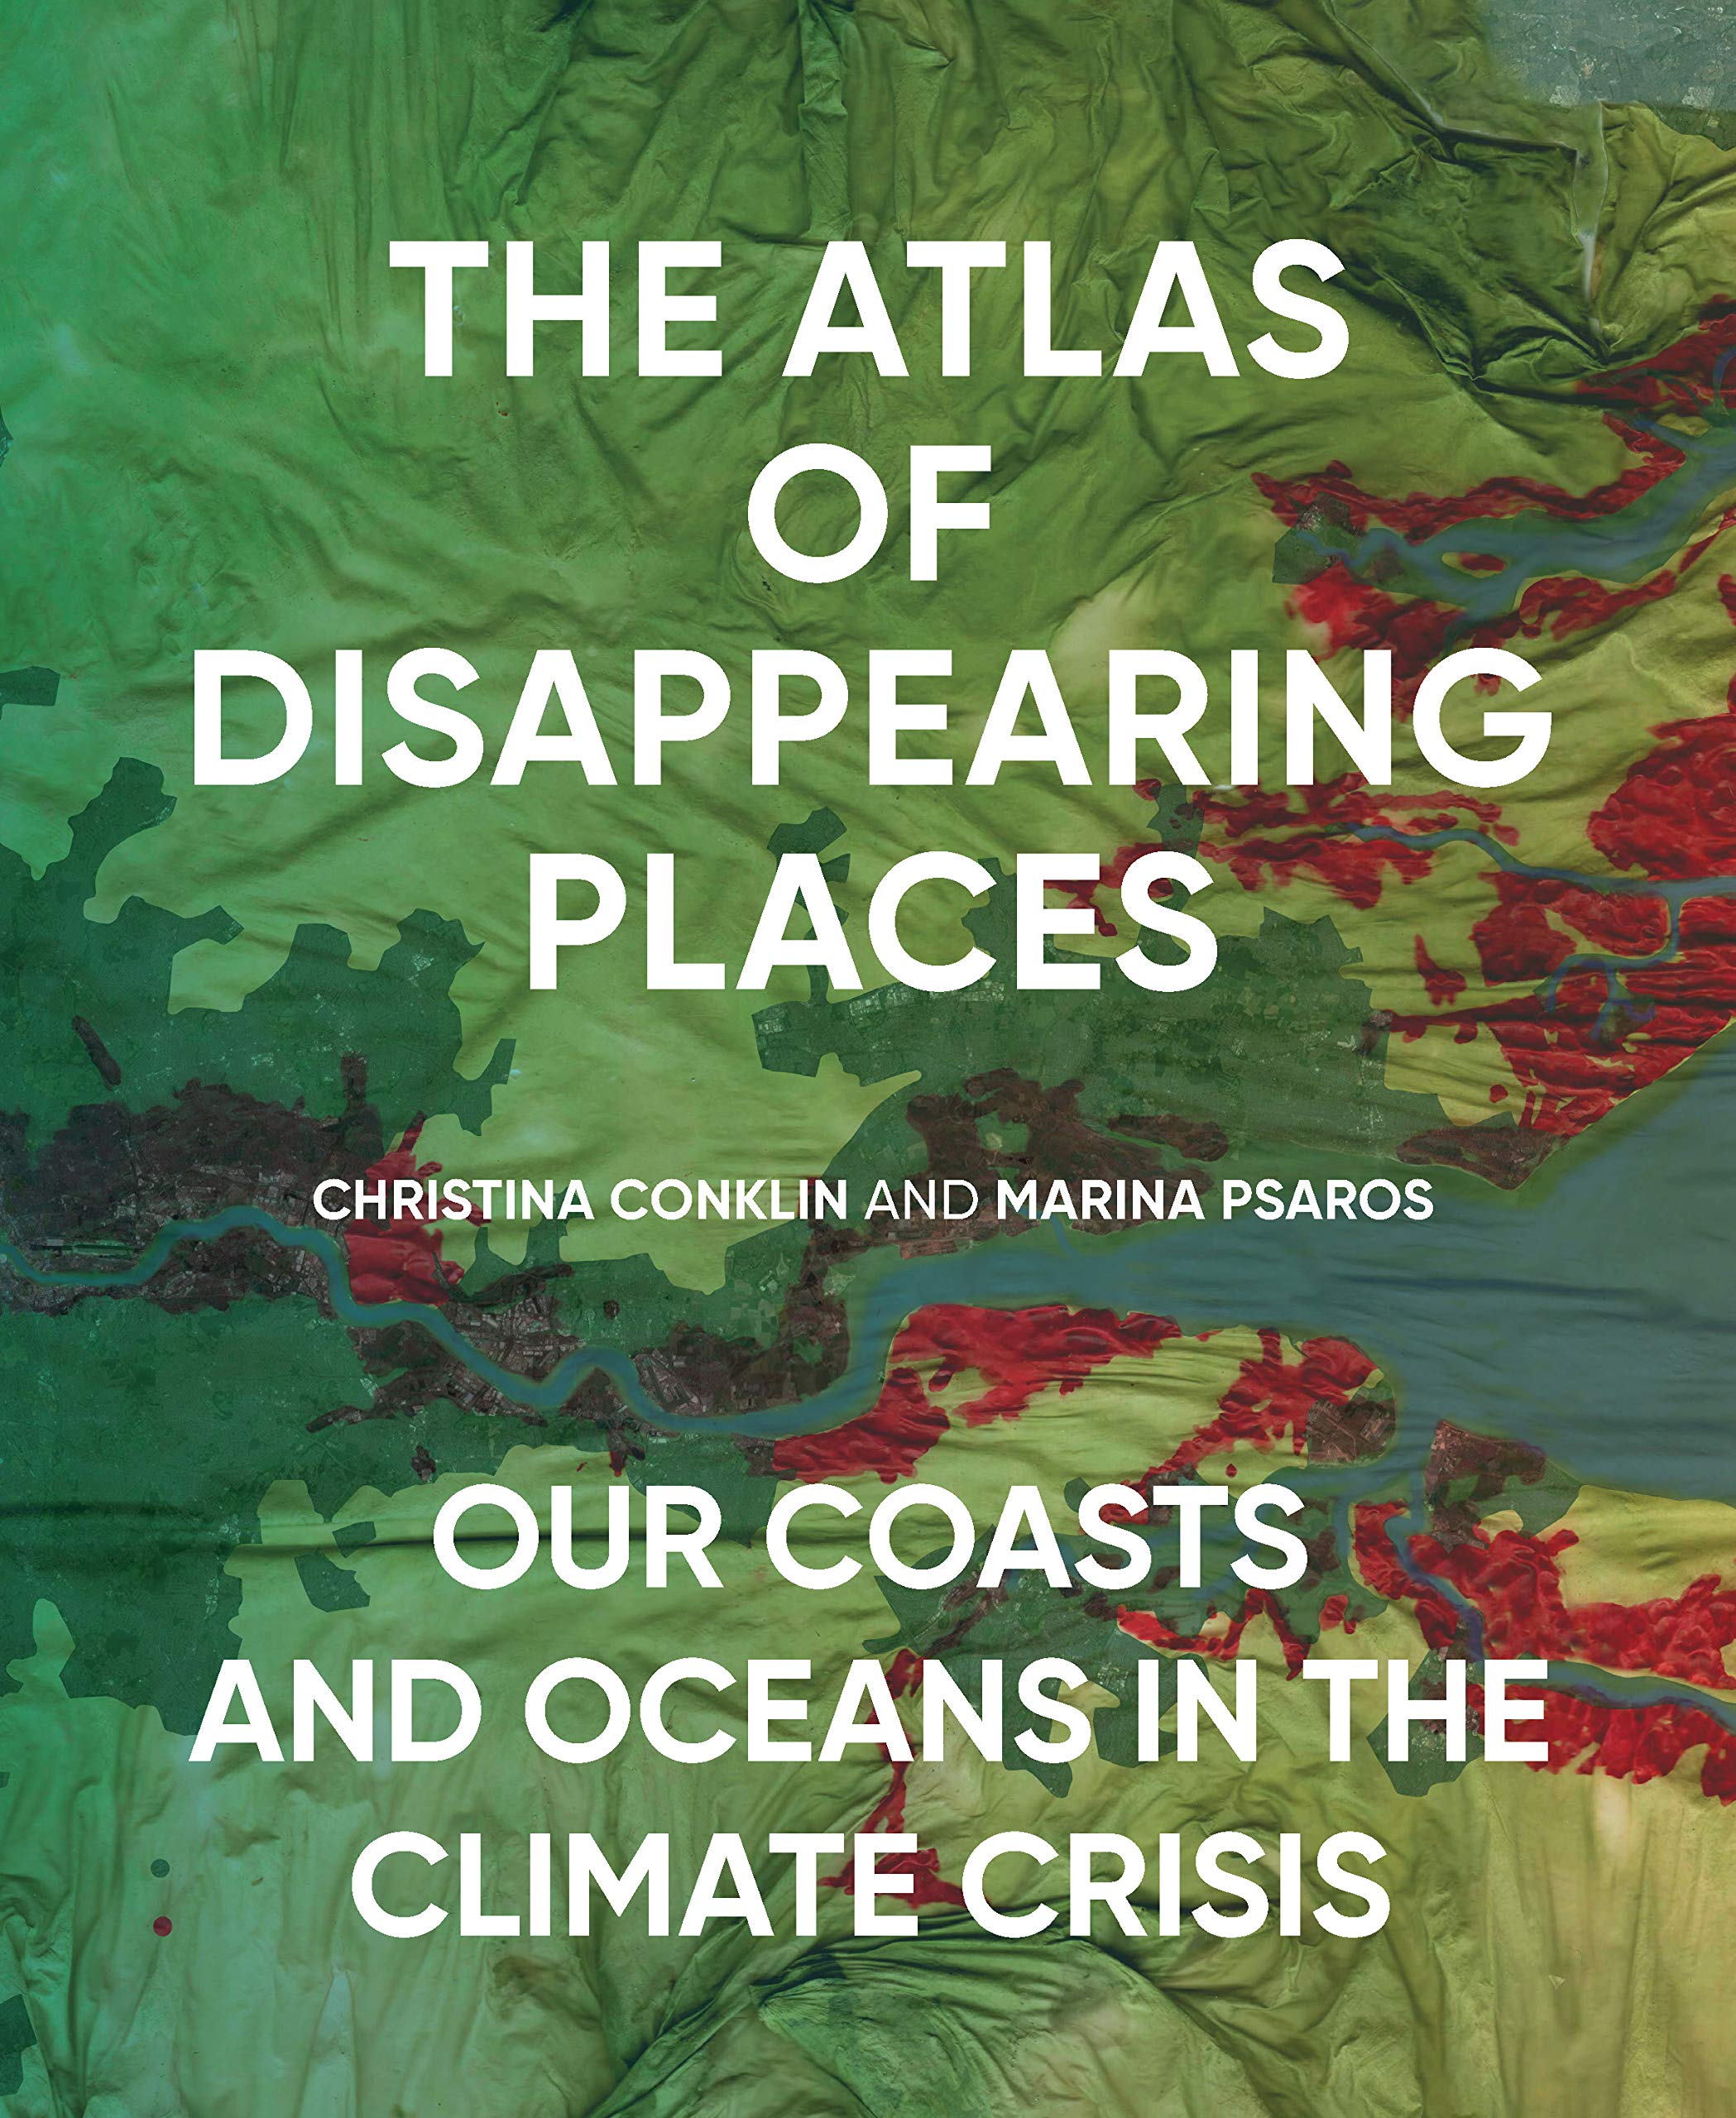 Christina Conklin, Marina Psaros: The Atlas of Disappearing Places (2021, New Press, The)